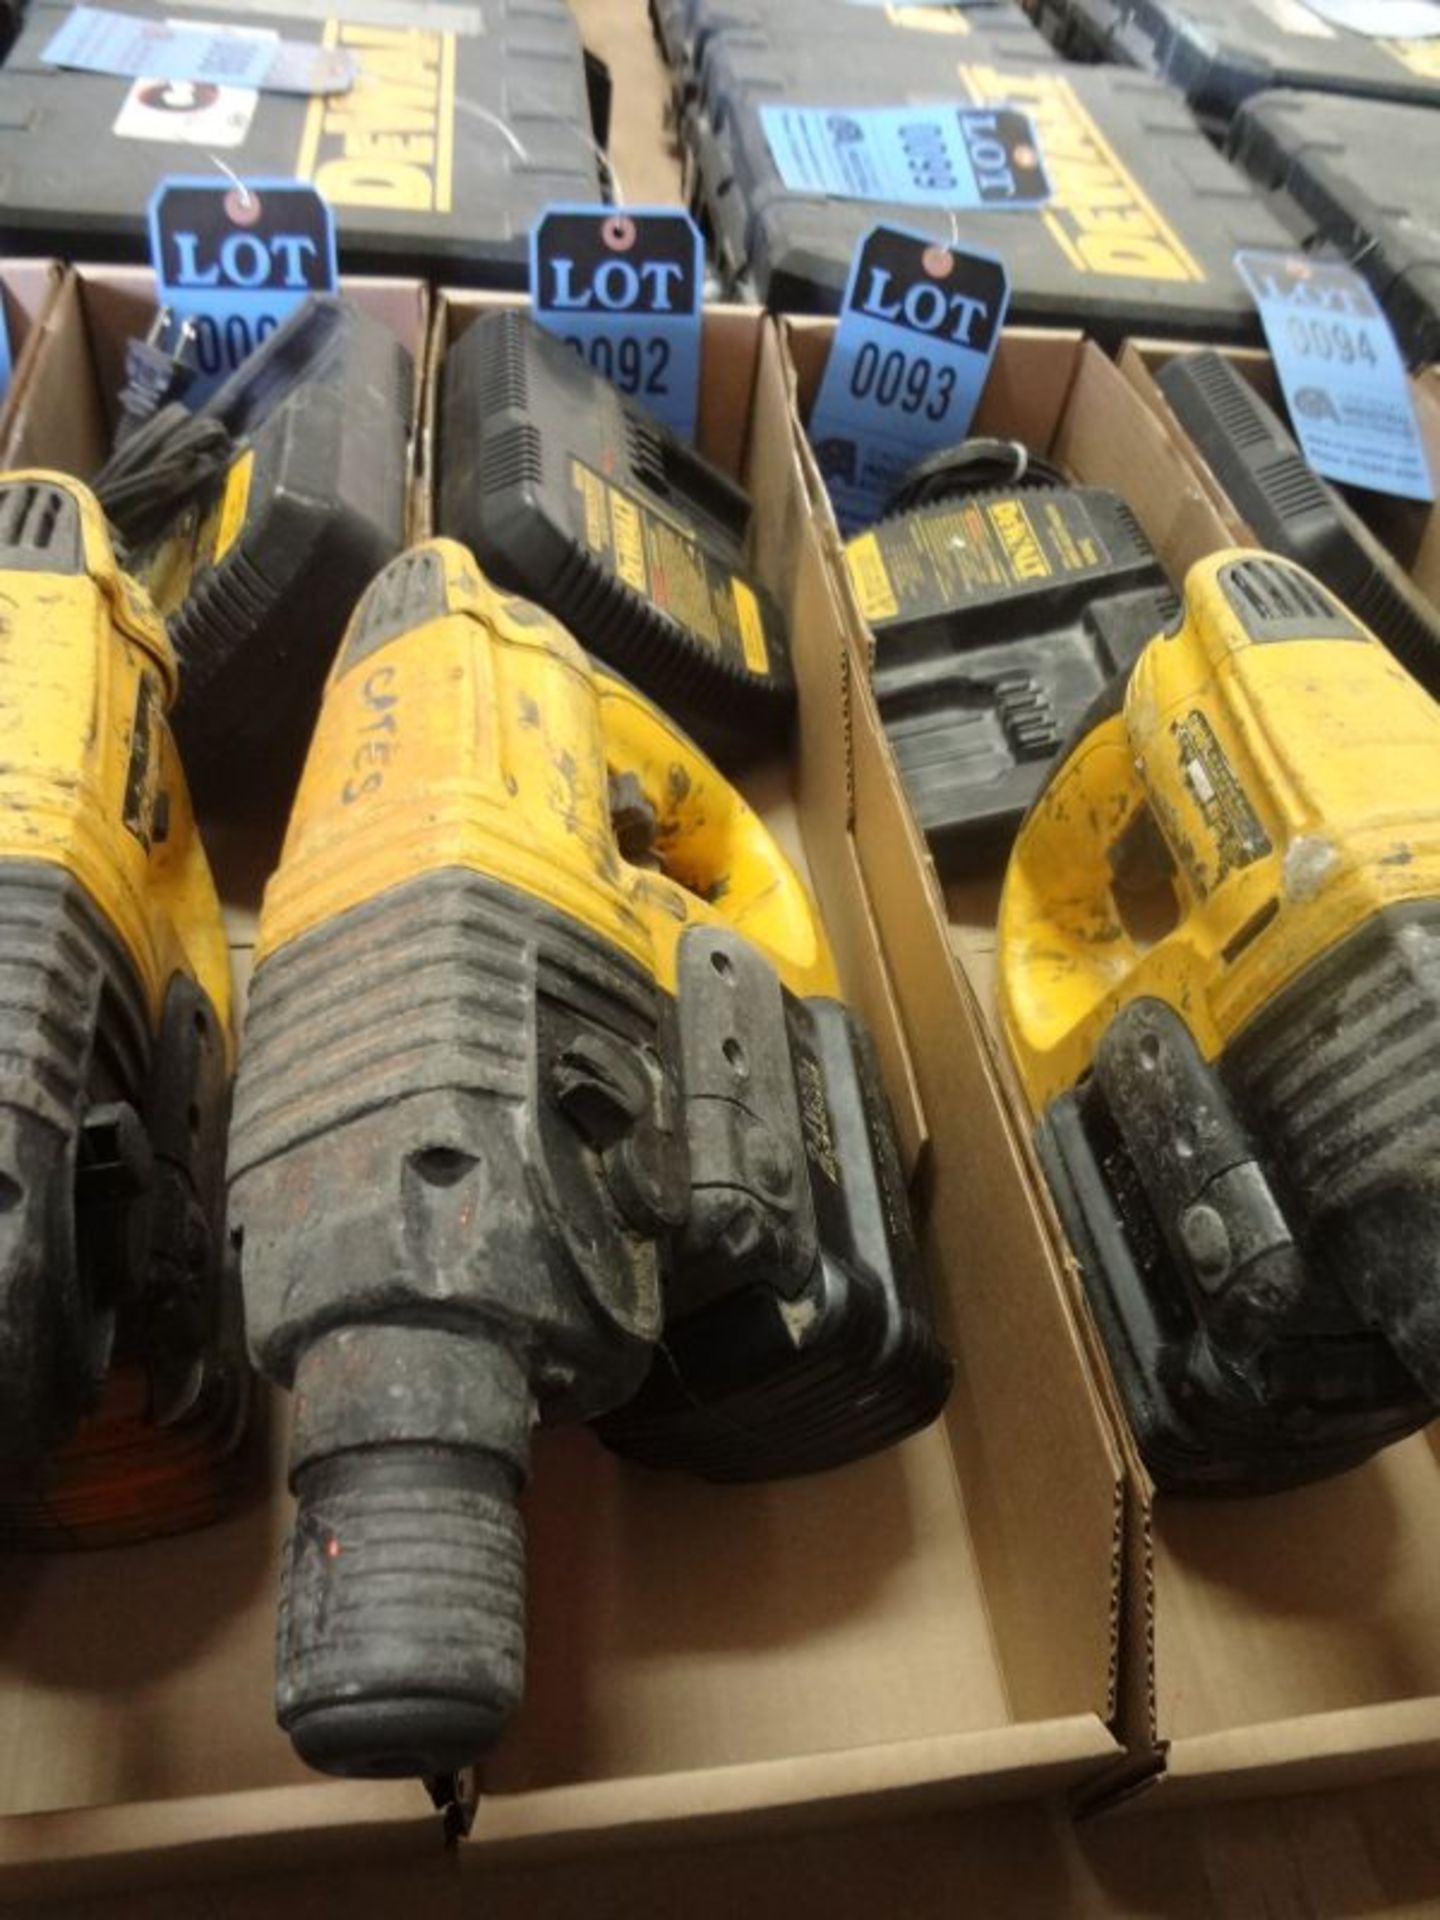 24 VOLT DEWALT CORDLESS ROTARY HAMMER DRILL WITH CHARGER